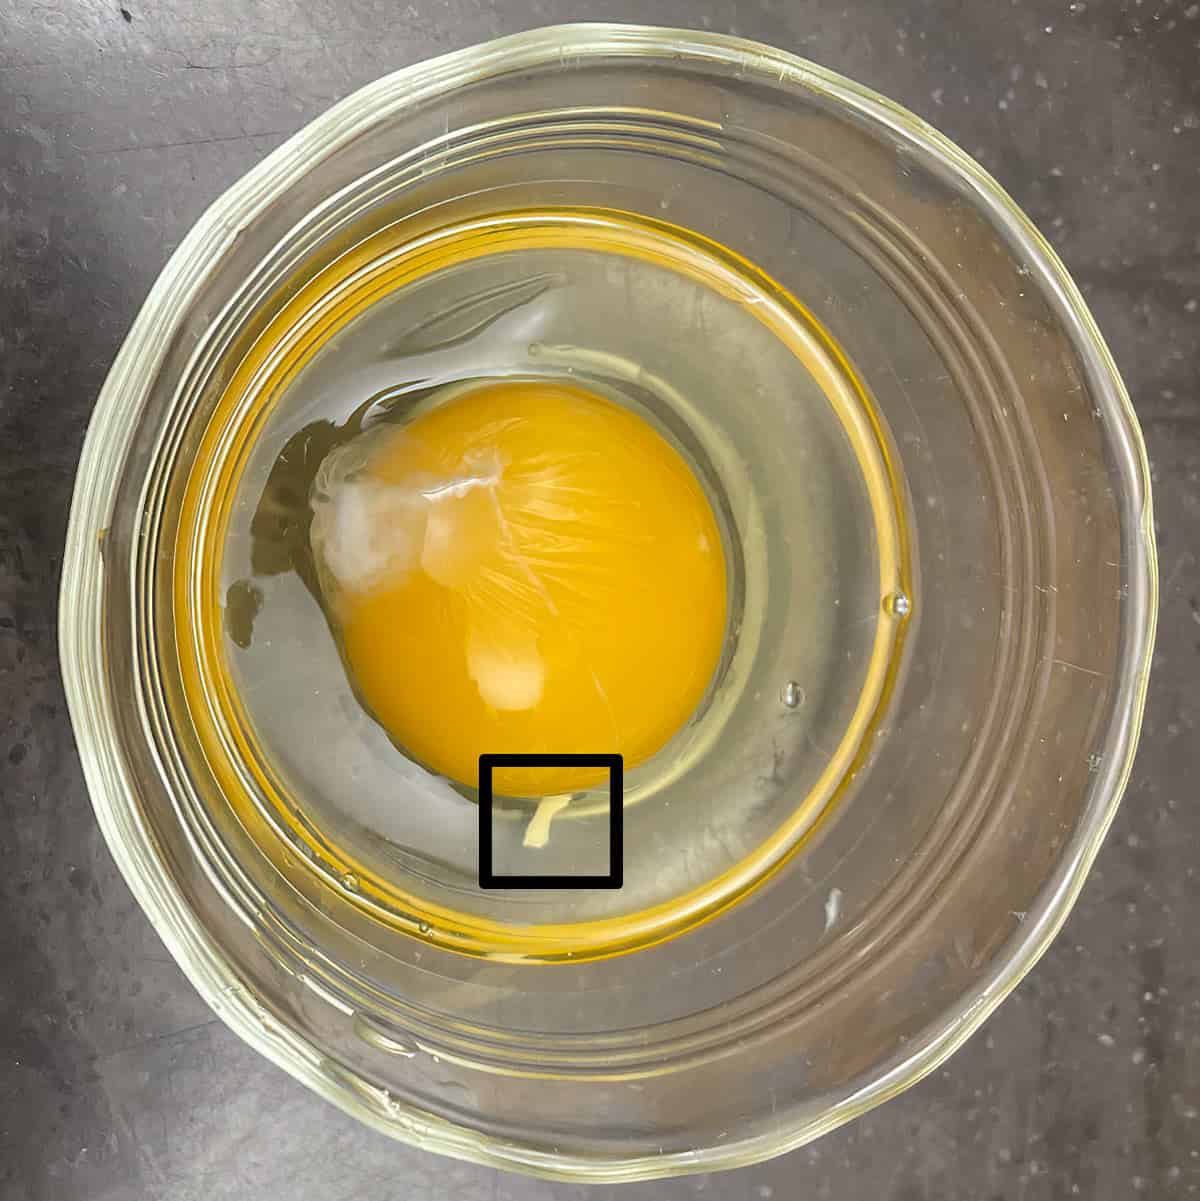 Single egg broken into a small cup and showing there is a piece of eggshell that dropped with the egg yolk.